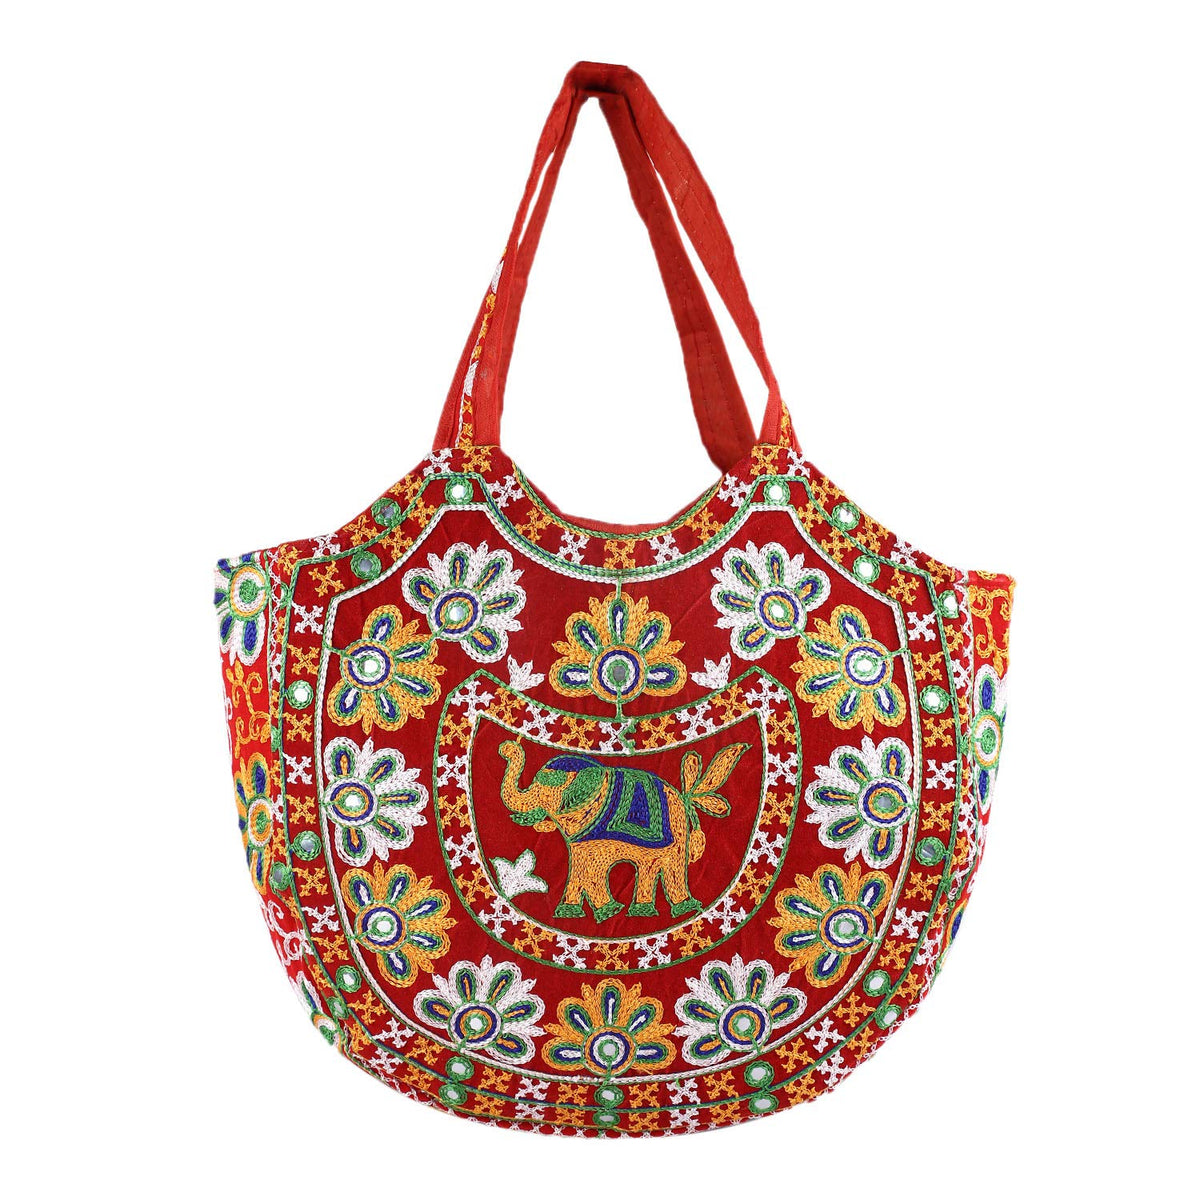 Kuber Industries Peacock Design Polyester Handcrafted Embroidery Women’s Shoulder Bag, Maroon (CTKTC4360)